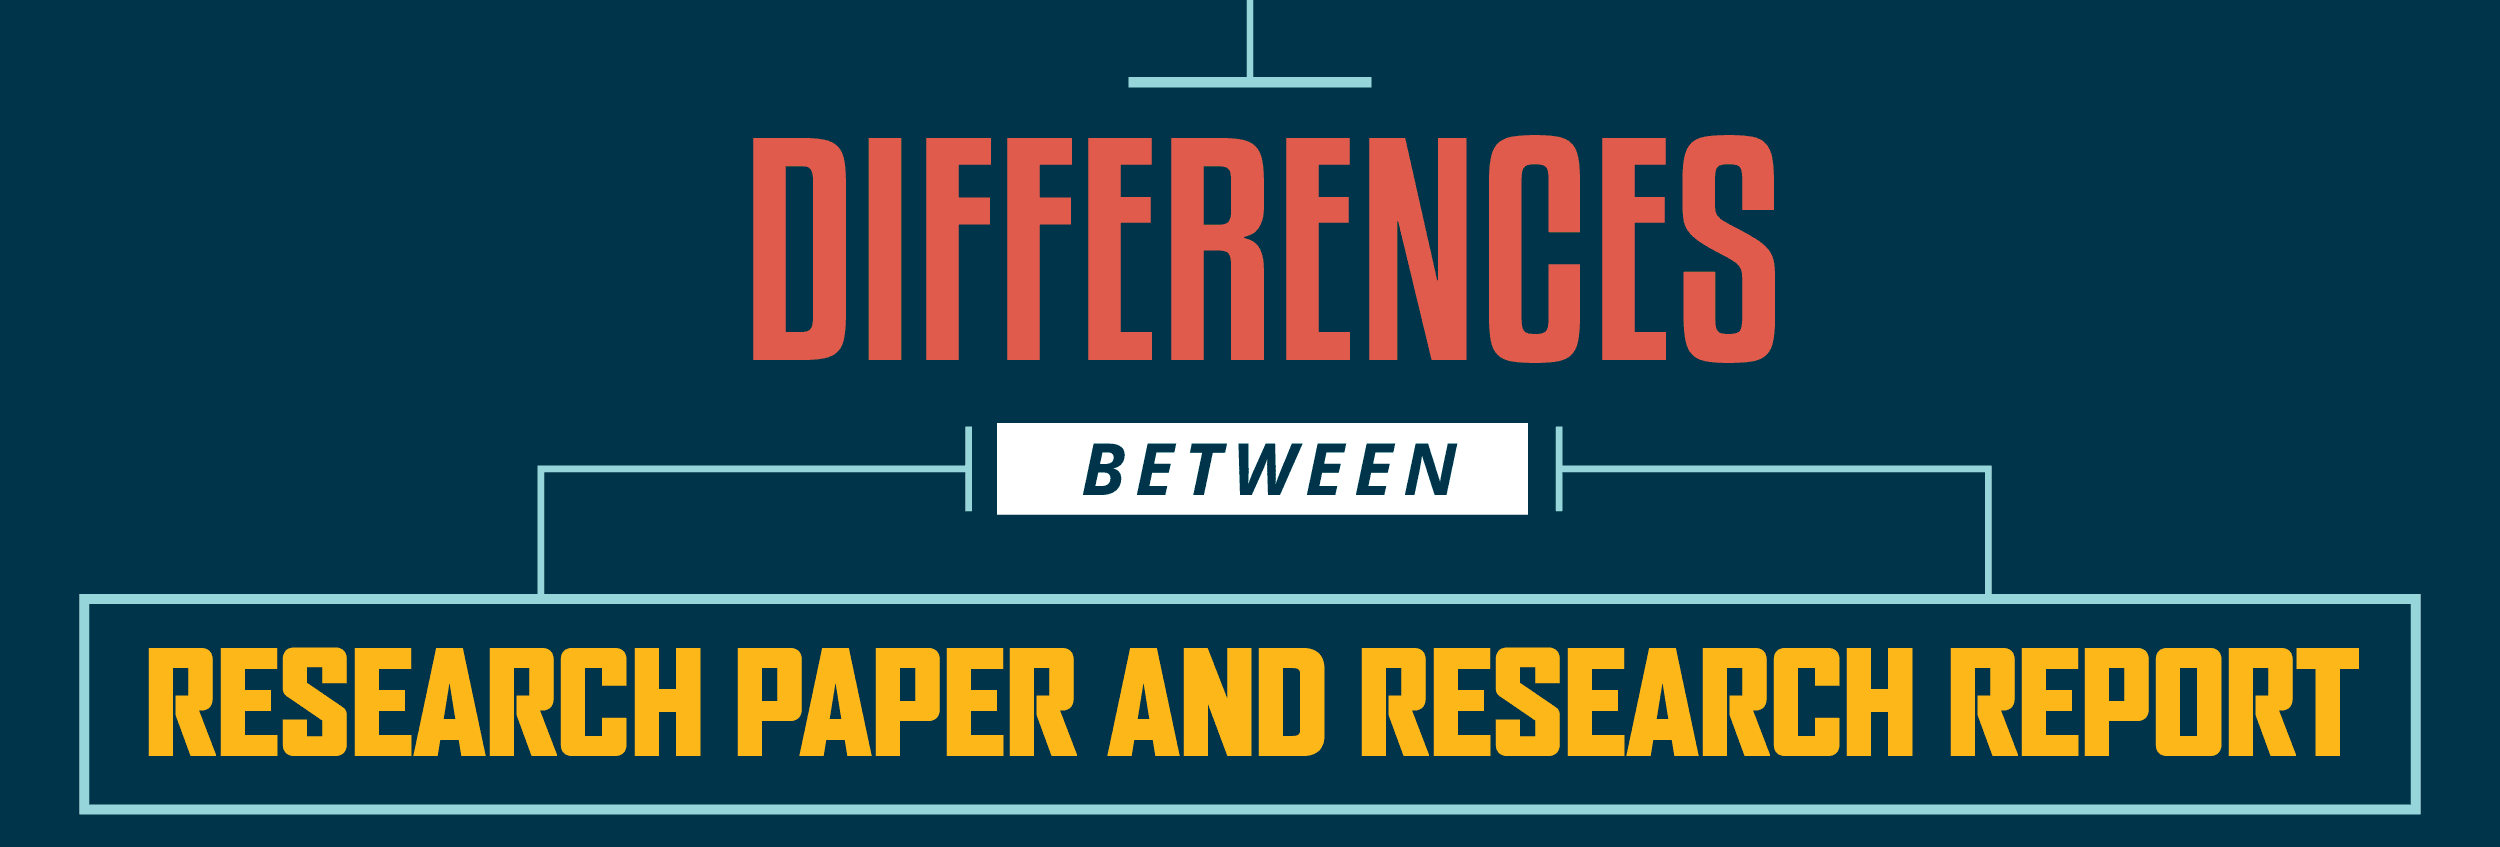 Difference Between Research Paper and Research Report